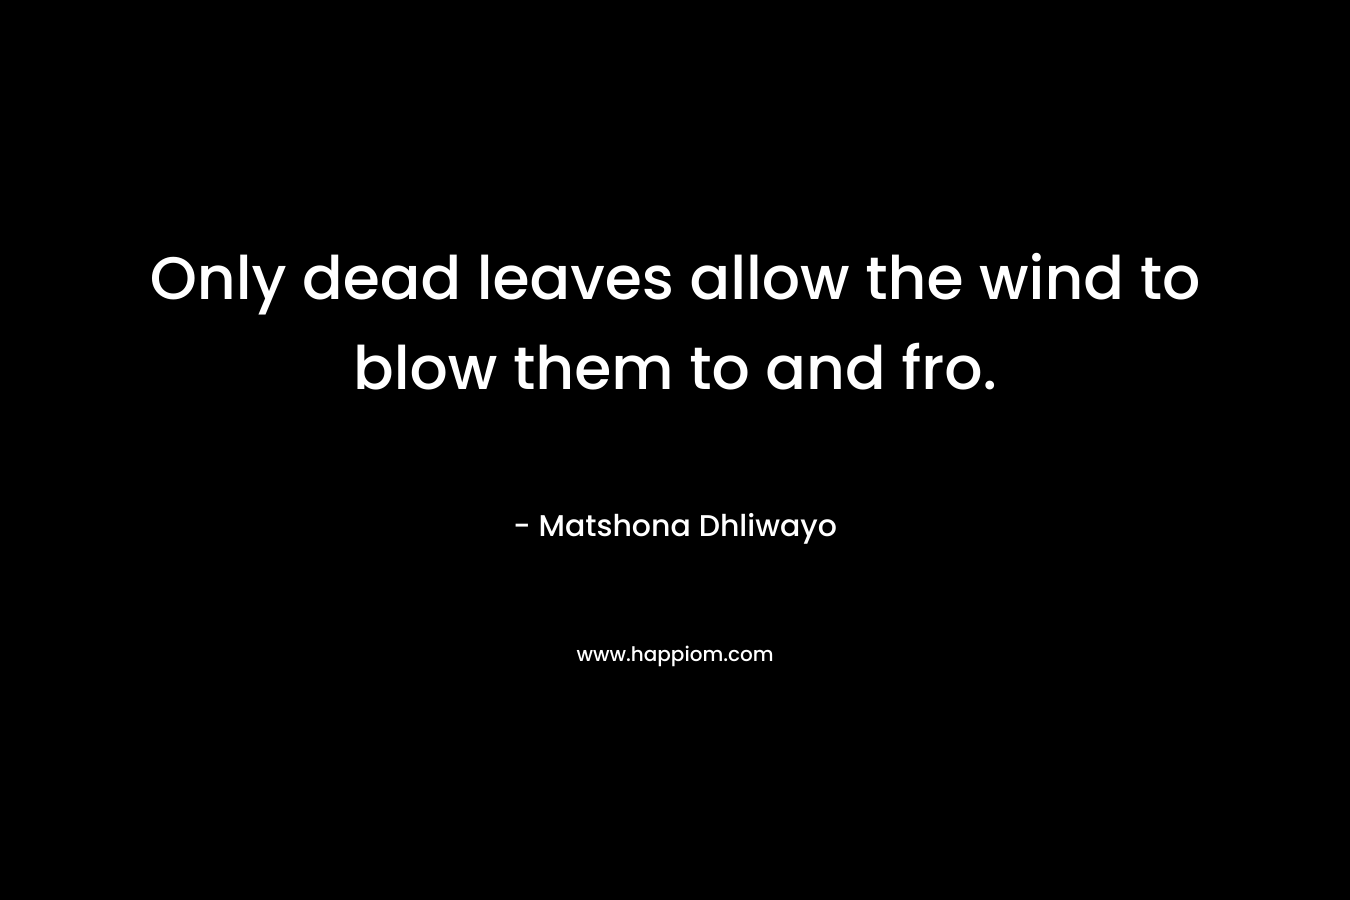 Only dead leaves allow the wind to blow them to and fro.